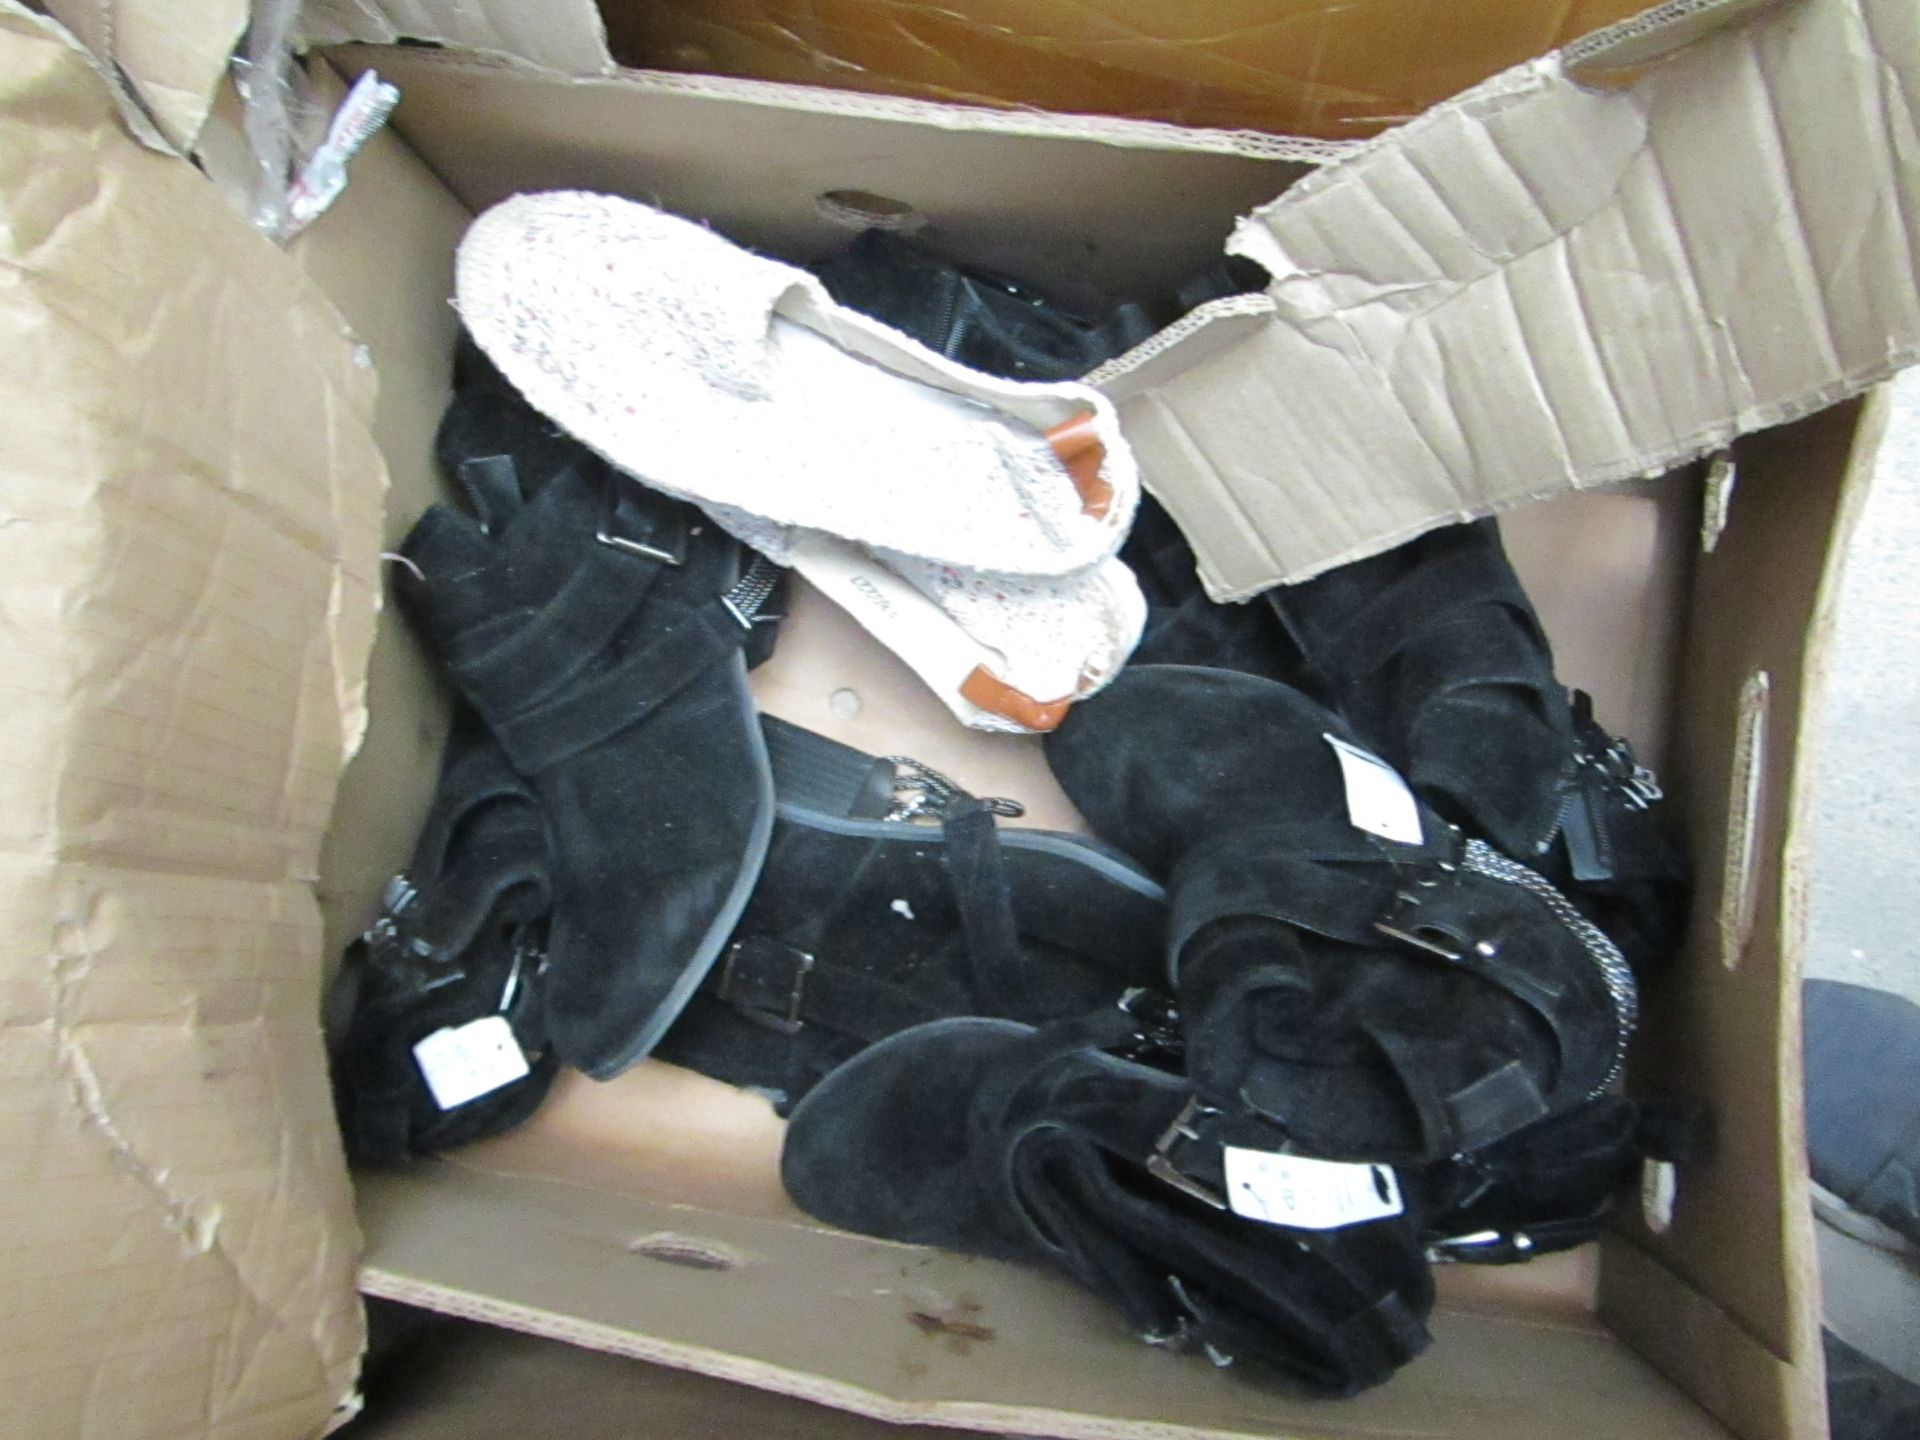 5x pairs of Boots and shoes, all various sizes and styles, all unchecked and unboxed